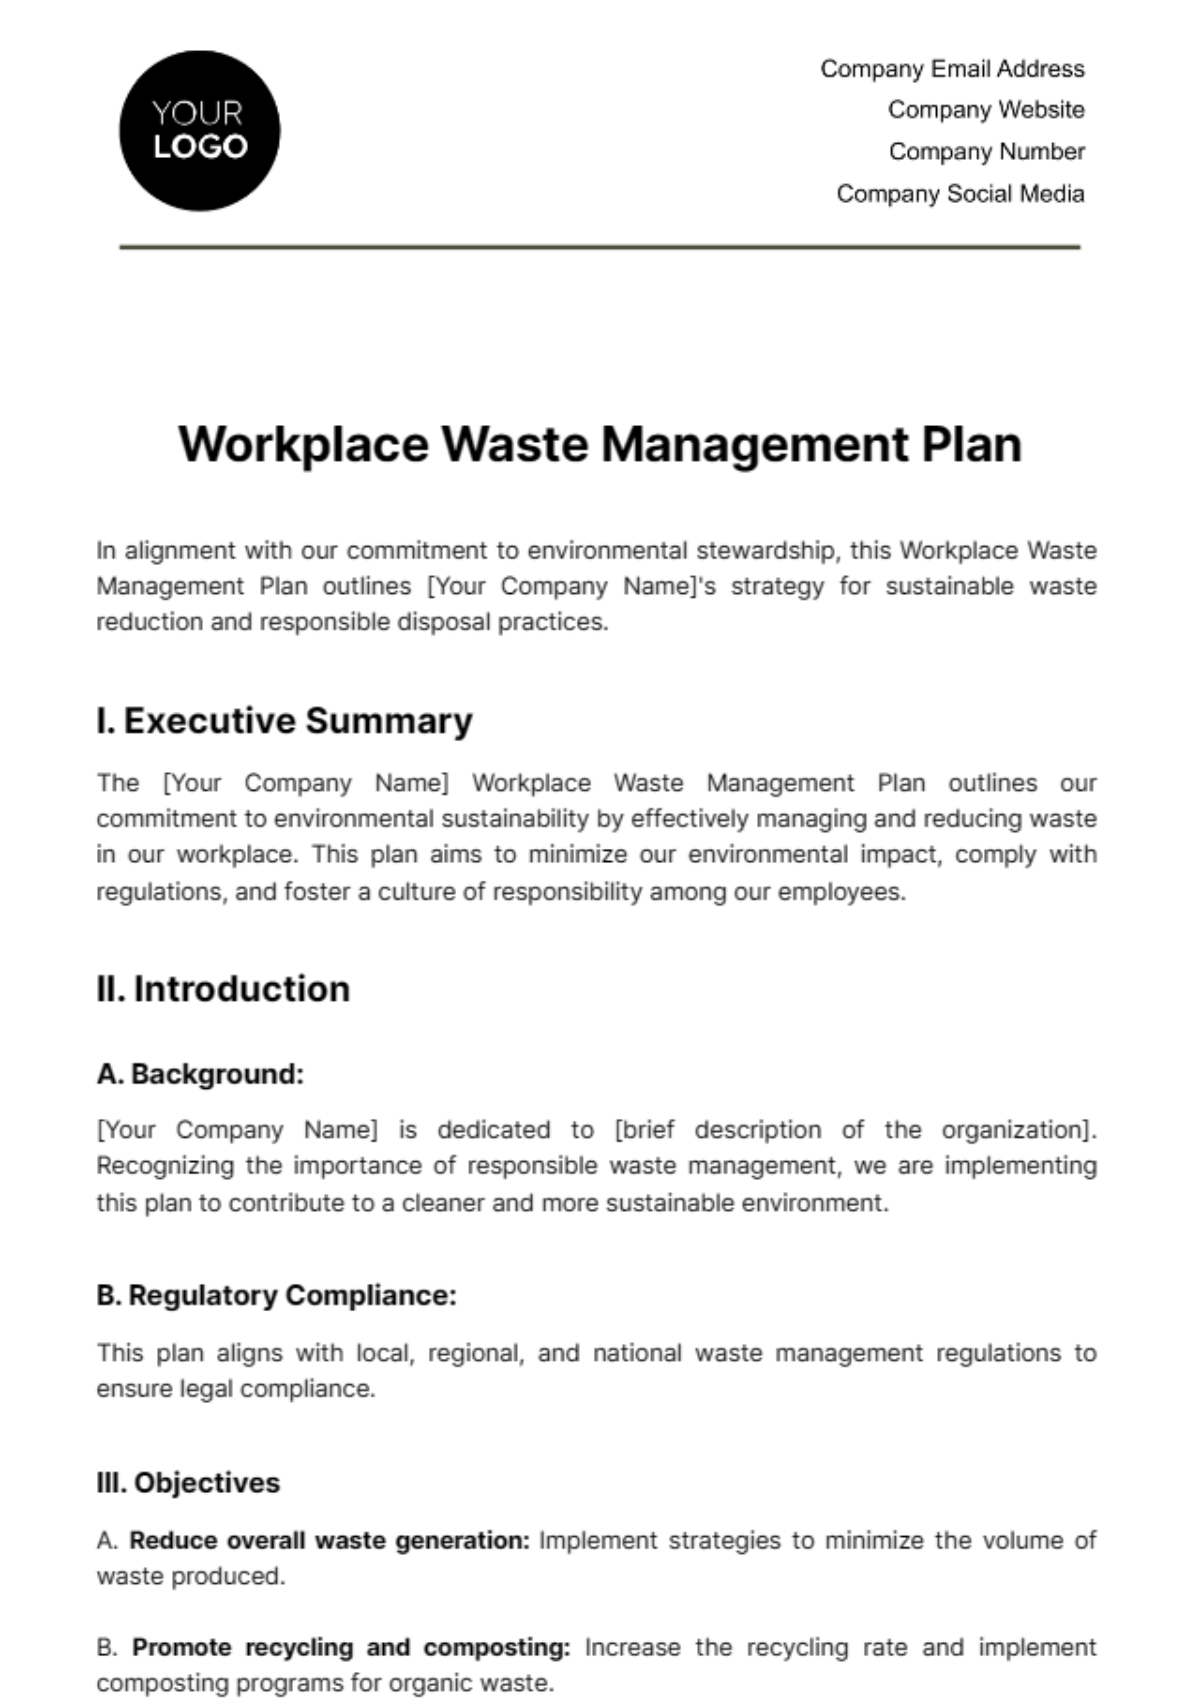 Free Workplace Waste Management Plan Template